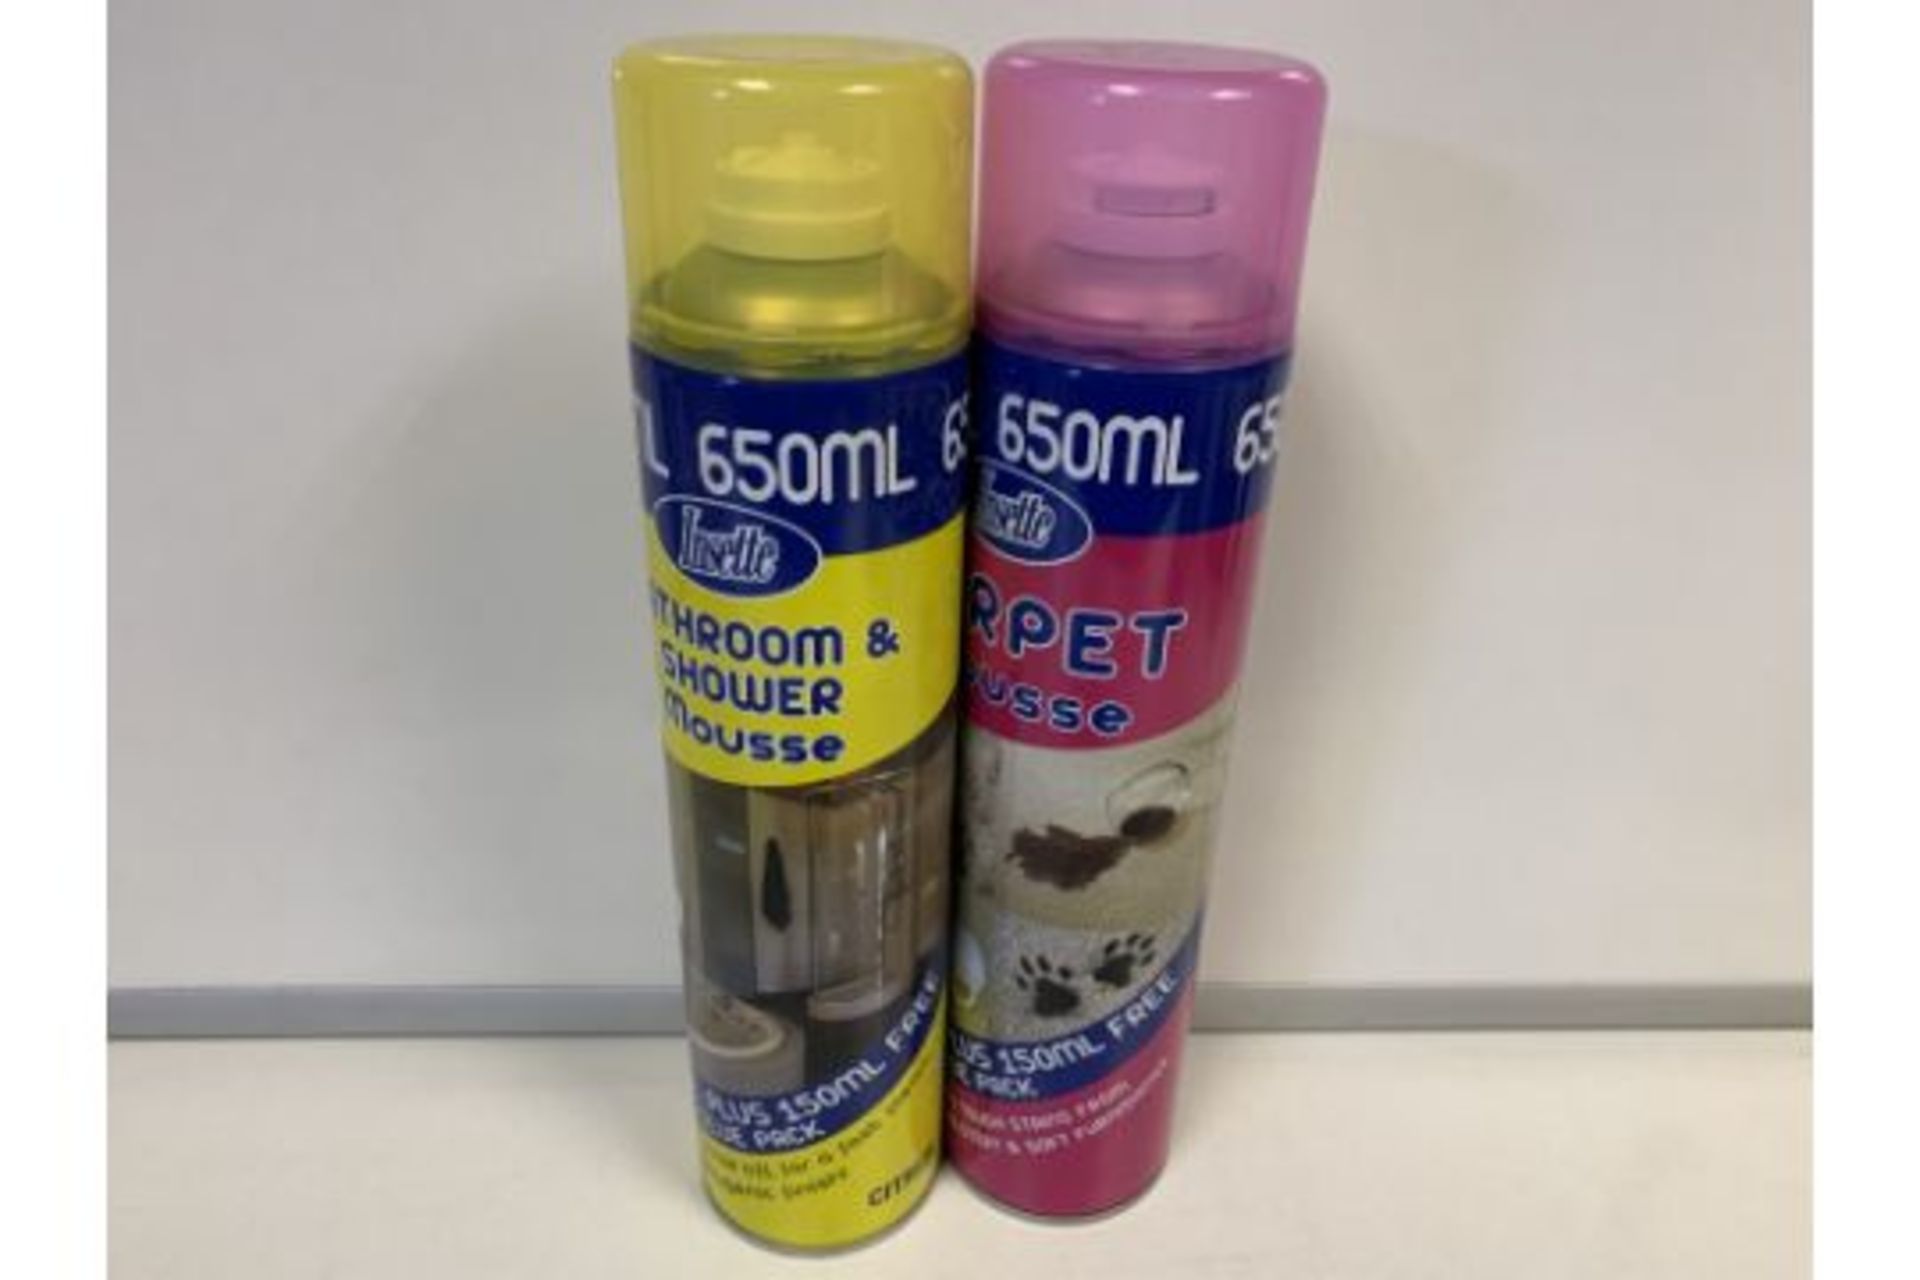 12 X BRAND NEW 650ML INSETTE BATHROOM AND SHOWER MOUSSE AND 5 X BRAND NEW 650ML CARPET MOUSSE